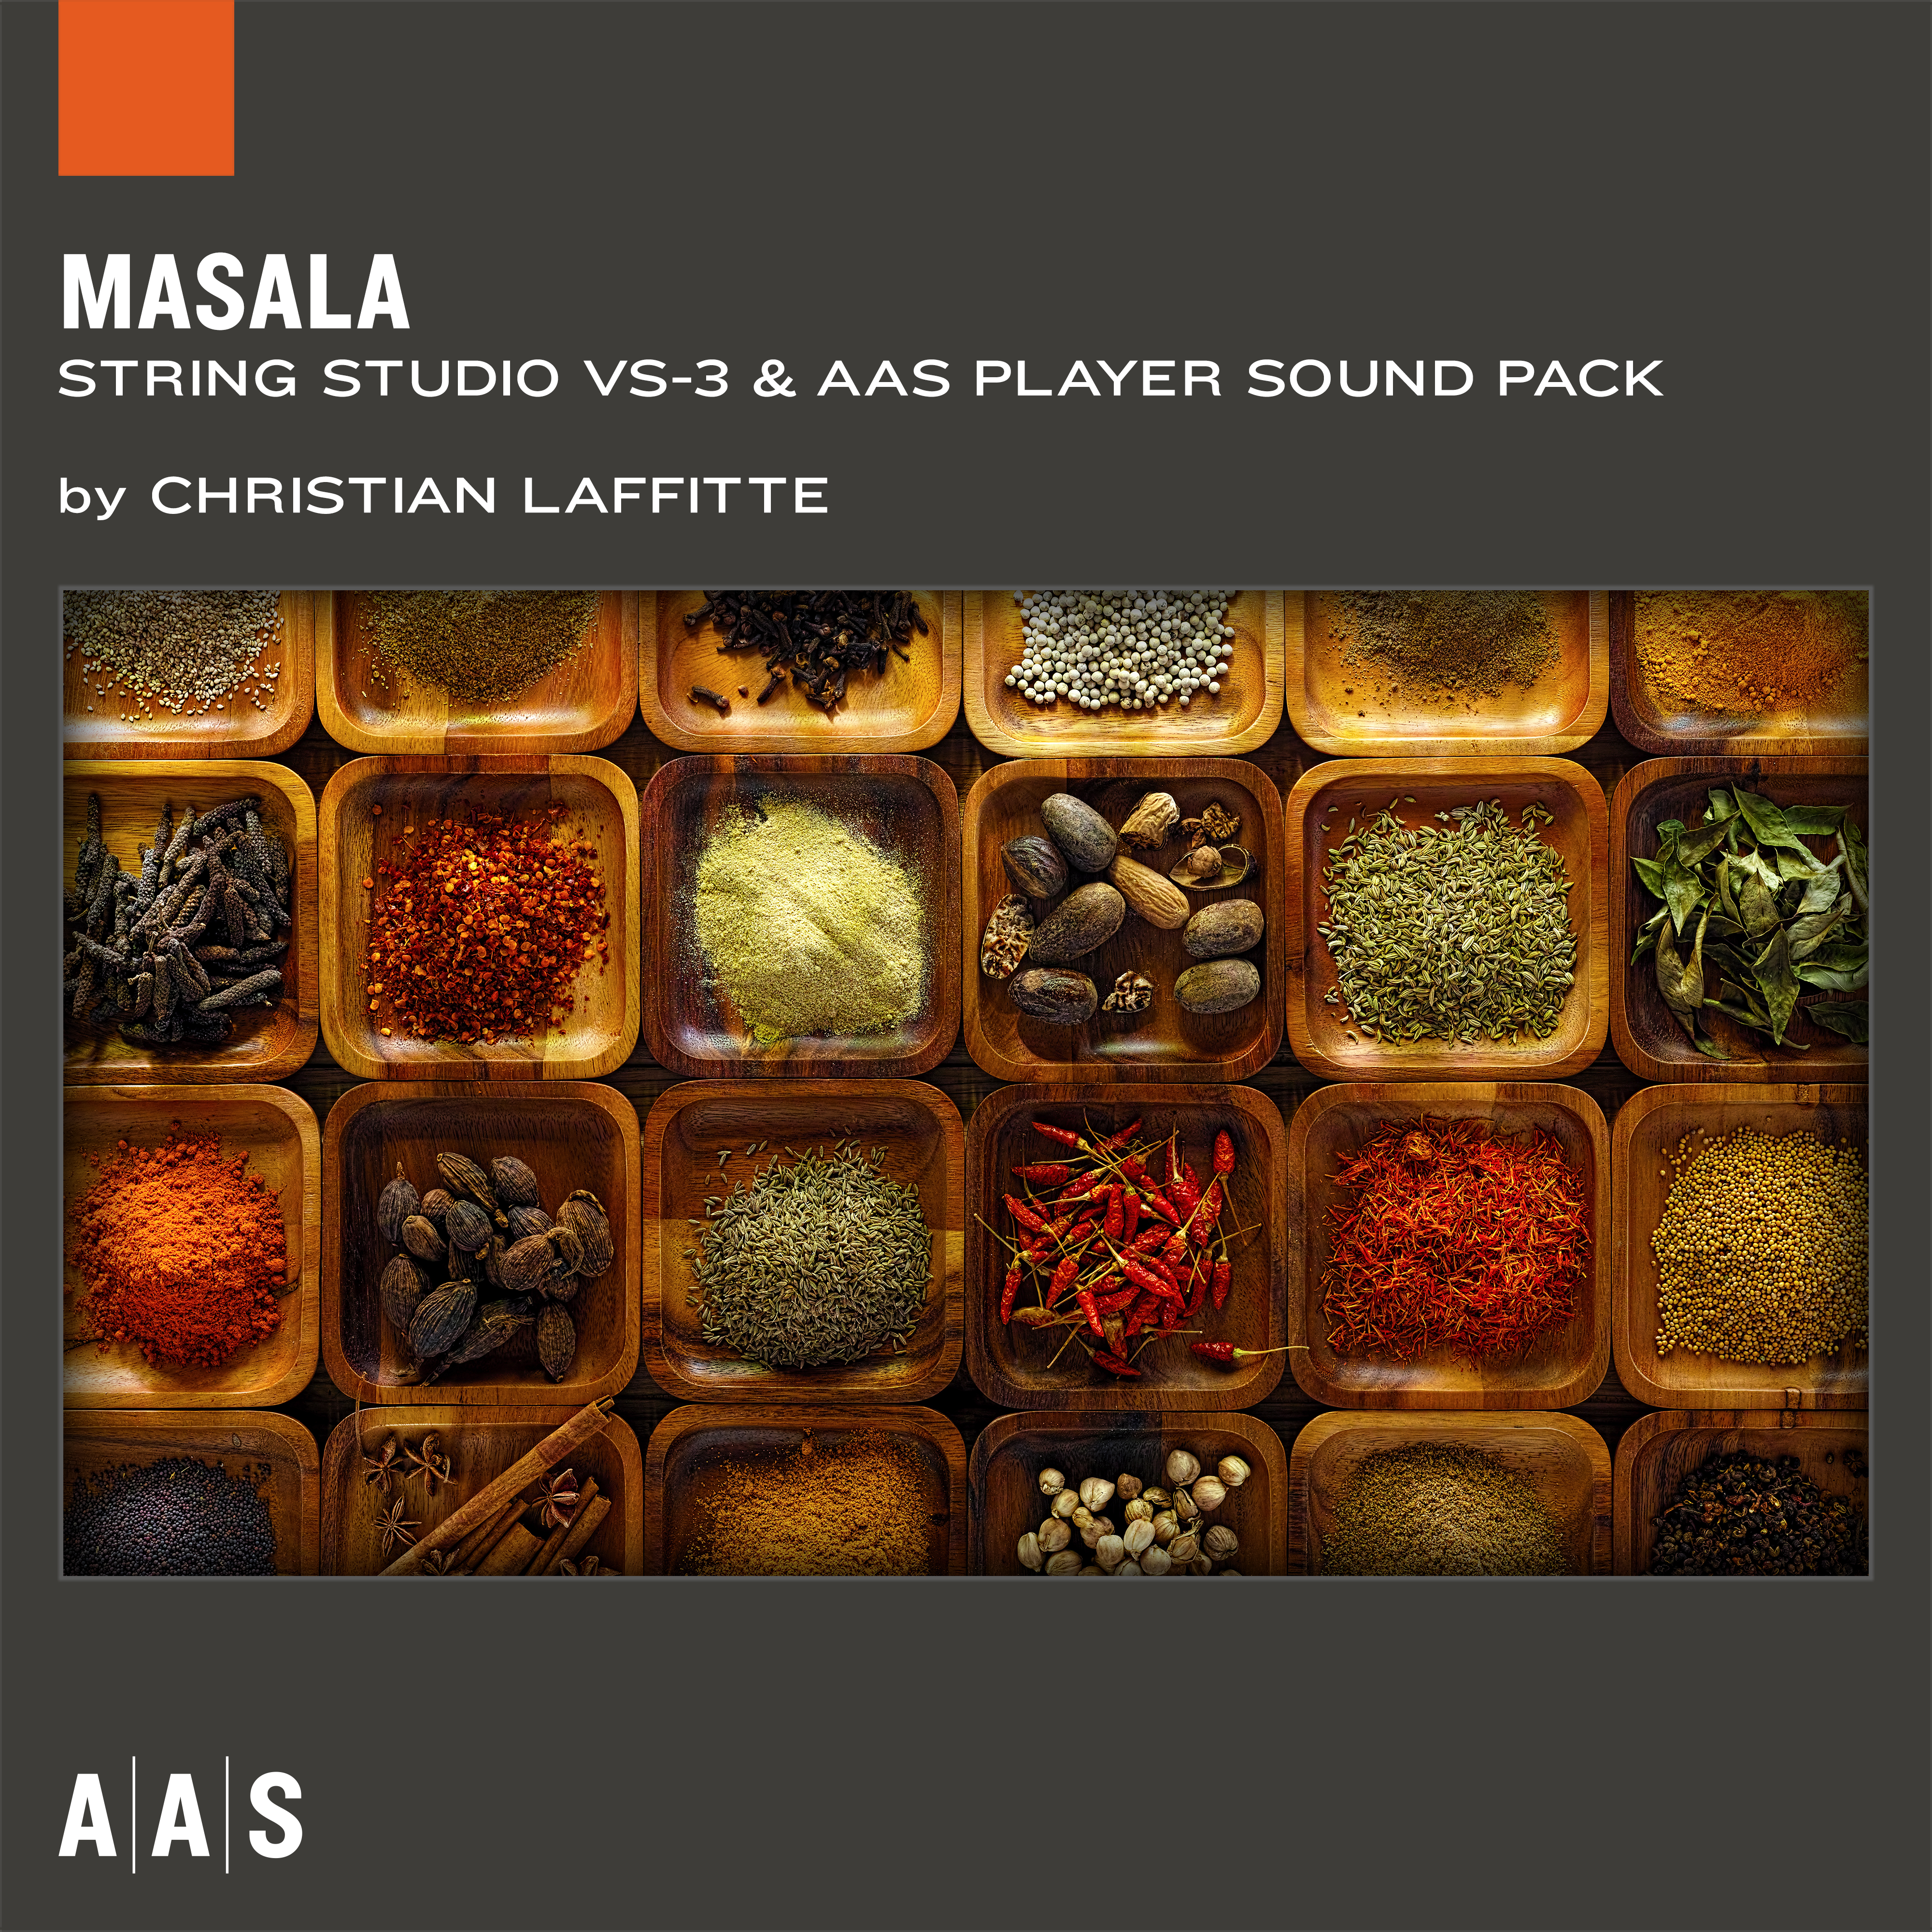 String Studio and AAS Player sound pack ： Masala